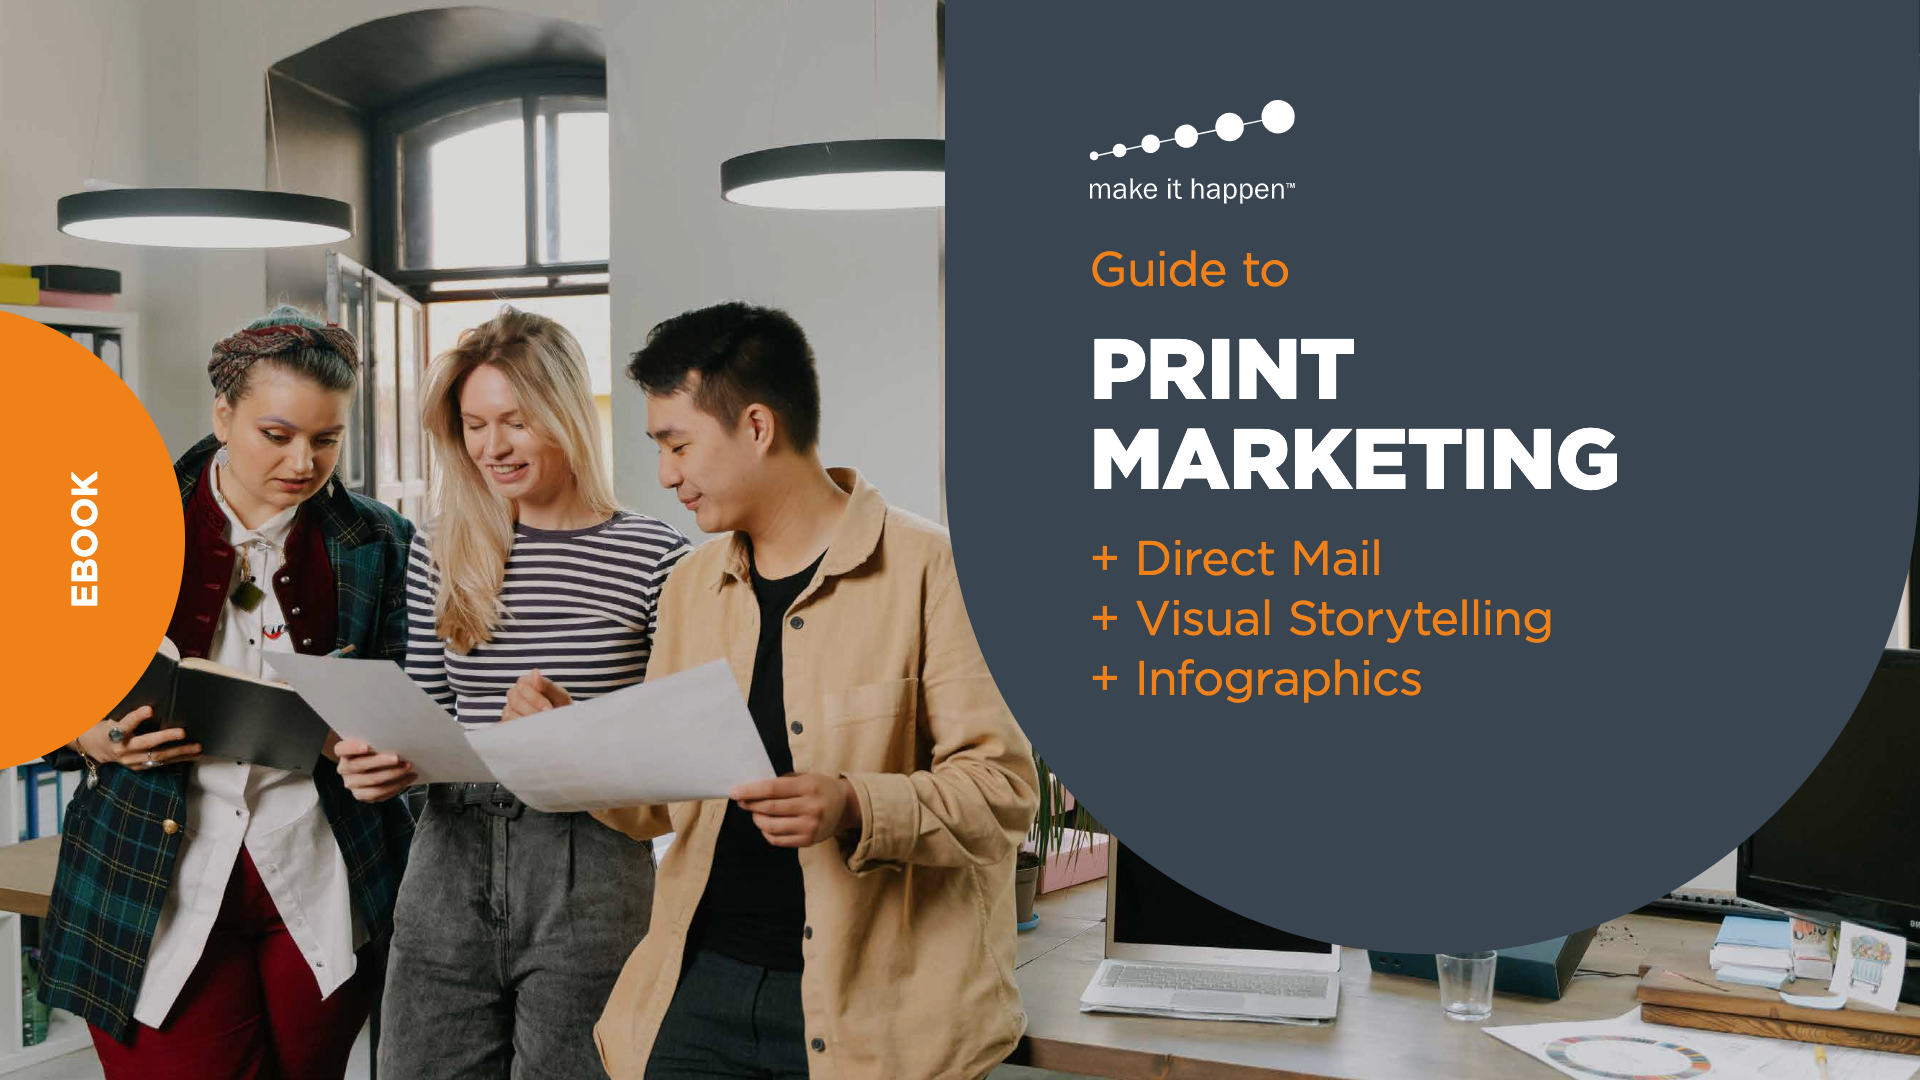 Guide to Print Marketing